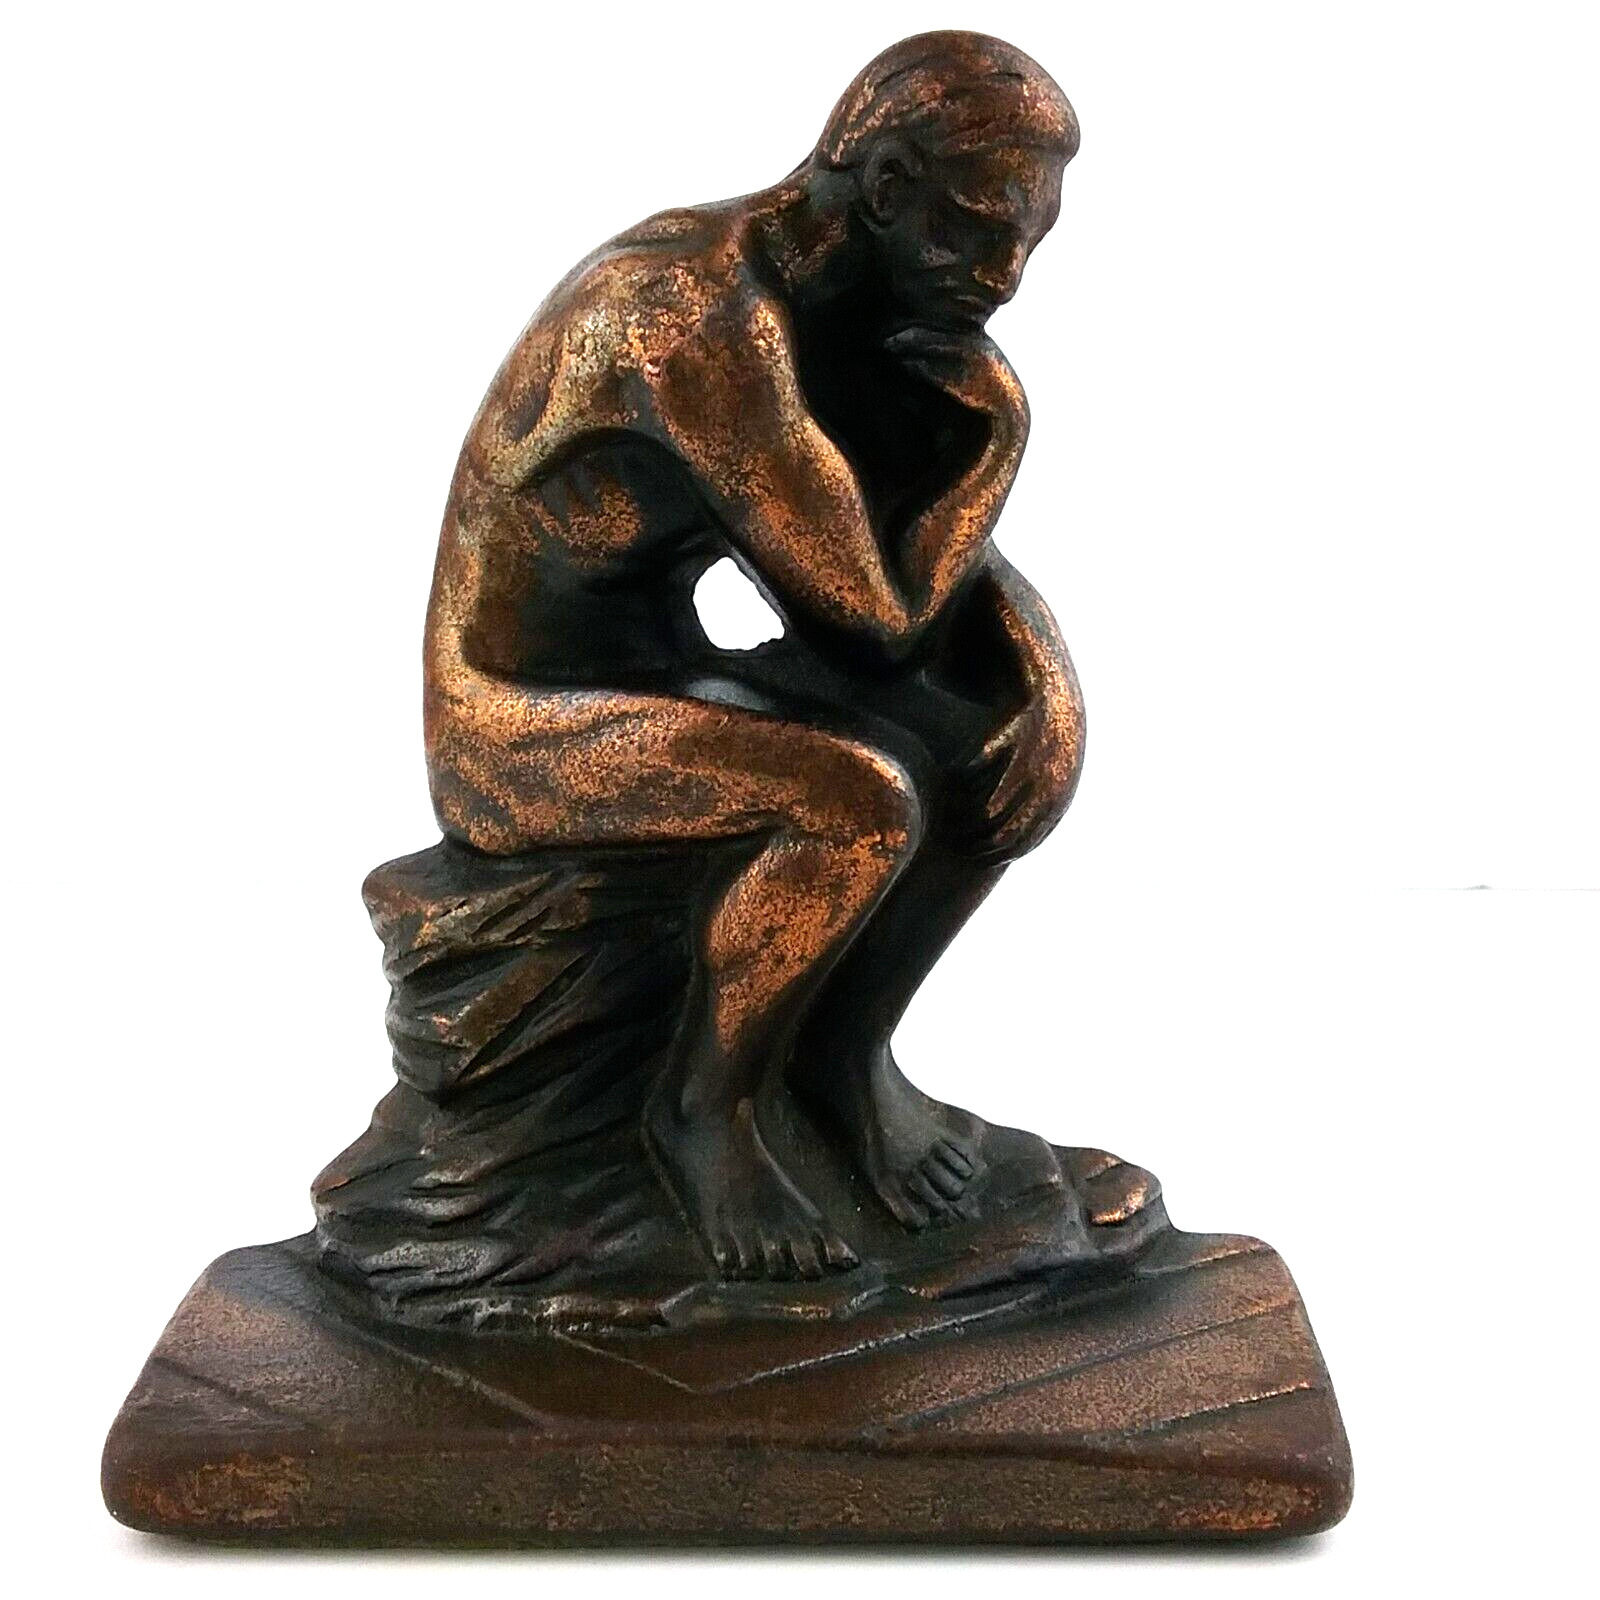 Rodin’s The Thinker Sculpture Bronzed Cast Iron Vintage 1928 Bookend